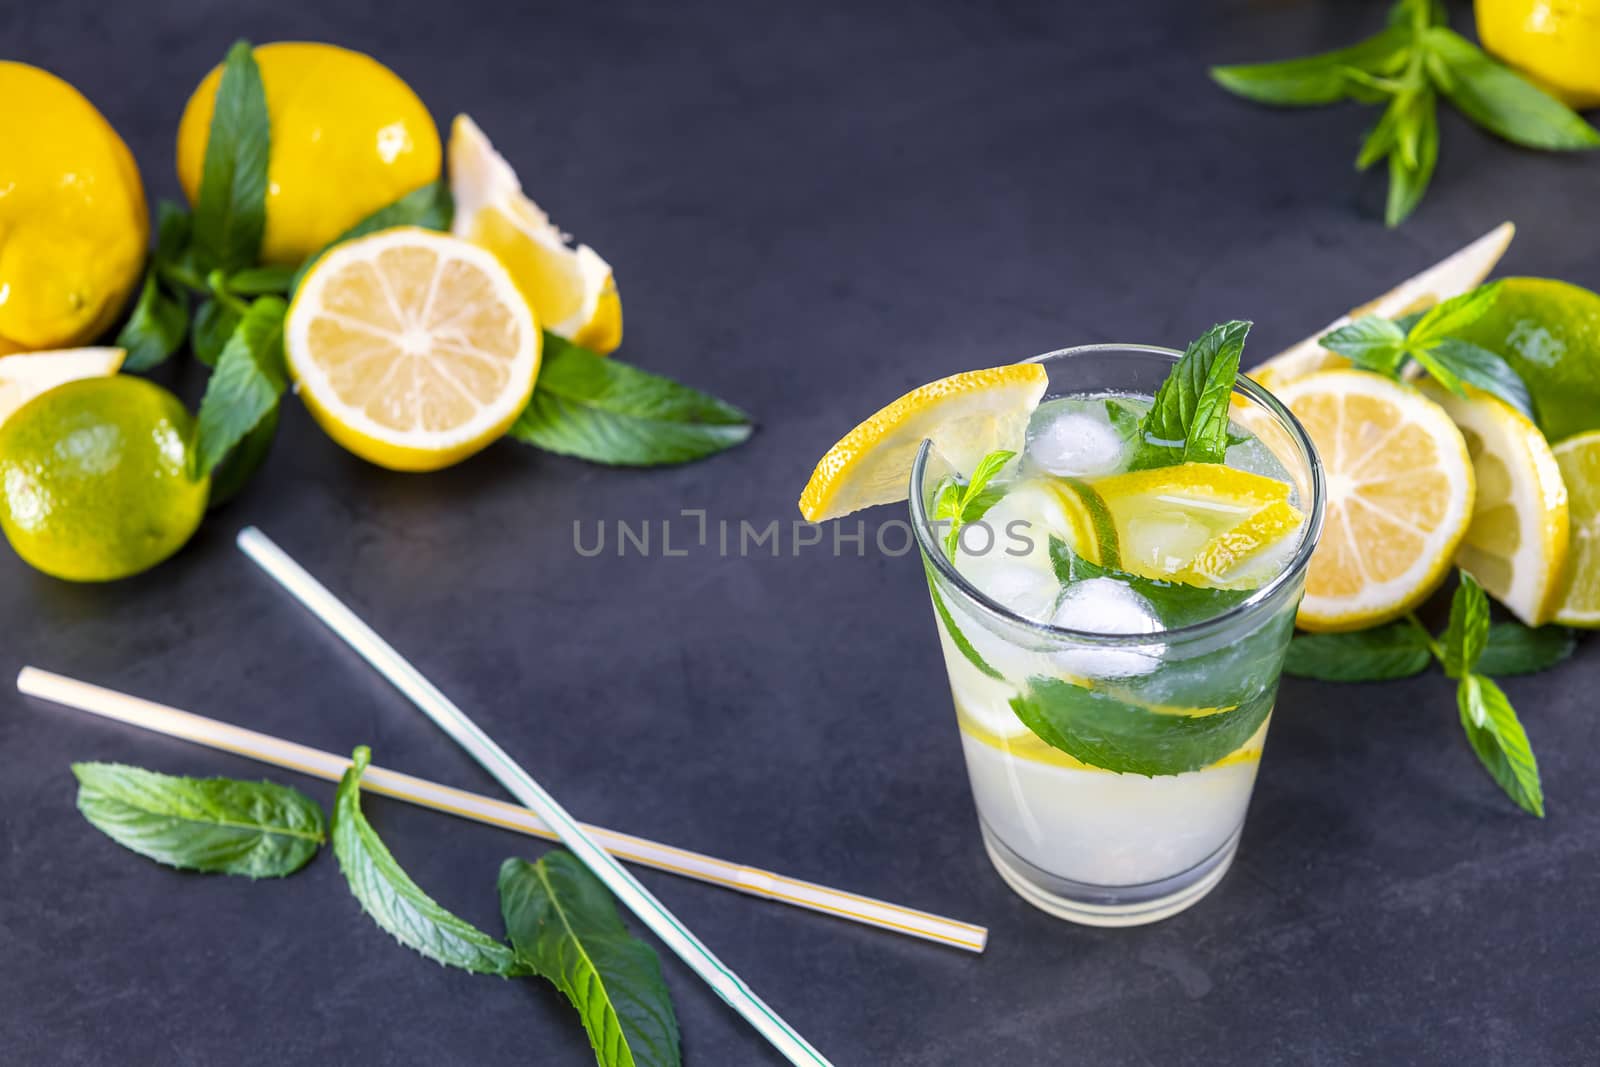 Top view of fresh lemonade with mint and ice in glasses on black background. Focus on ice.